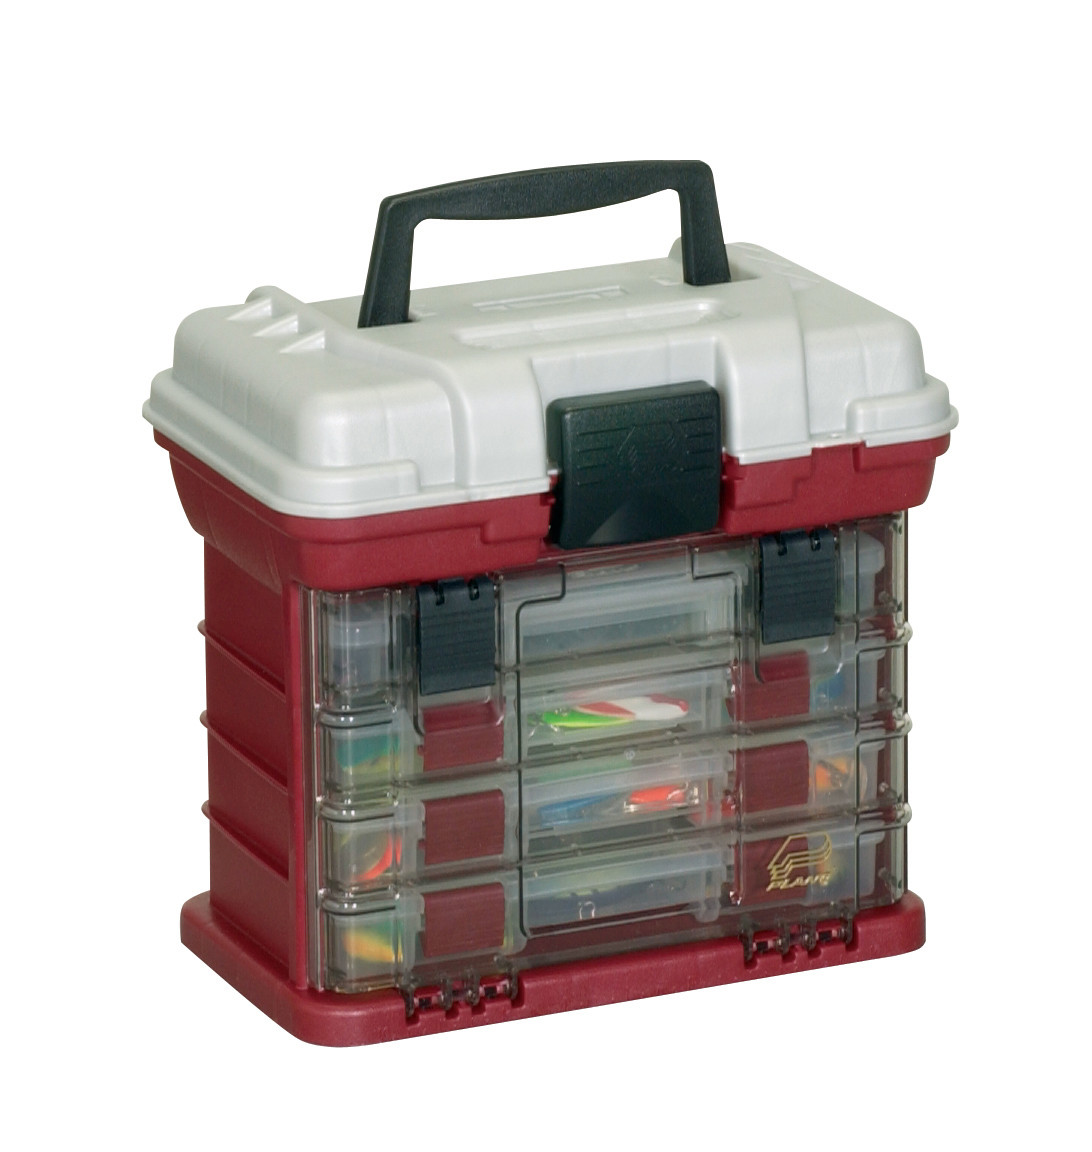 Jarvis Walker 1-Tray Clear-Top Tackle Box